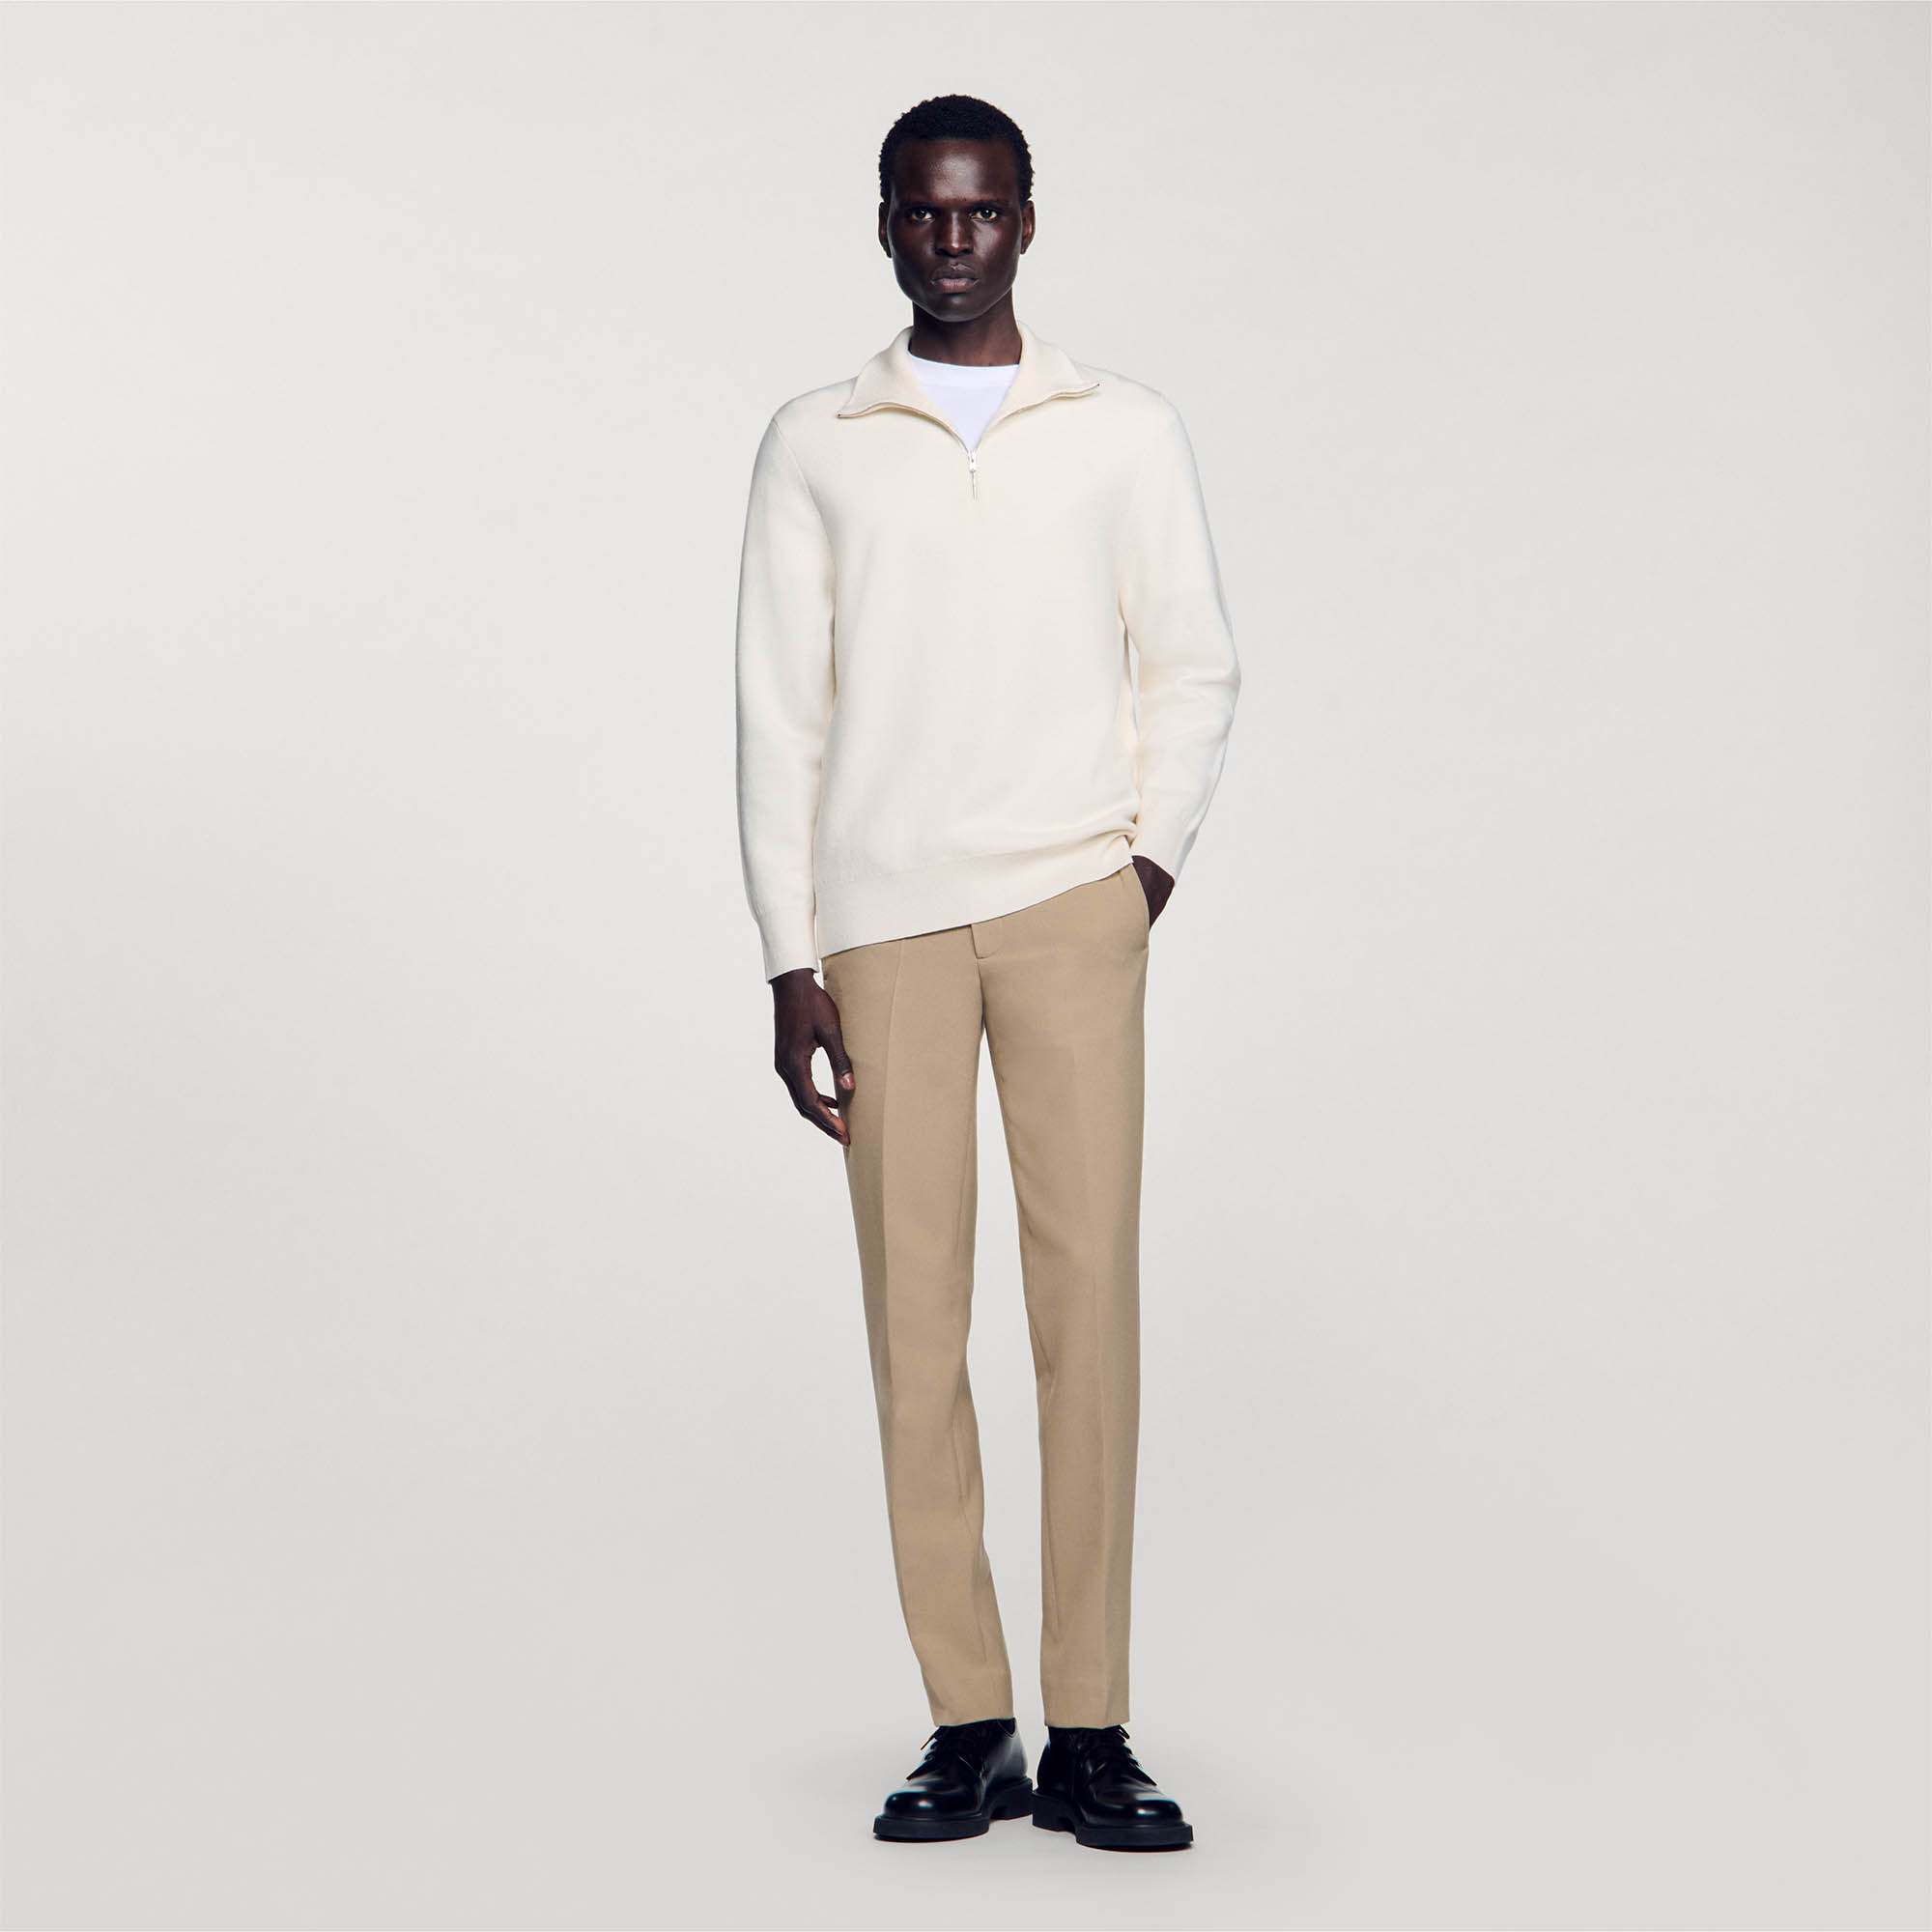 Sandro cotton Milano knit jumper with ribbed half-zip neck, zip fastening and long sleeves